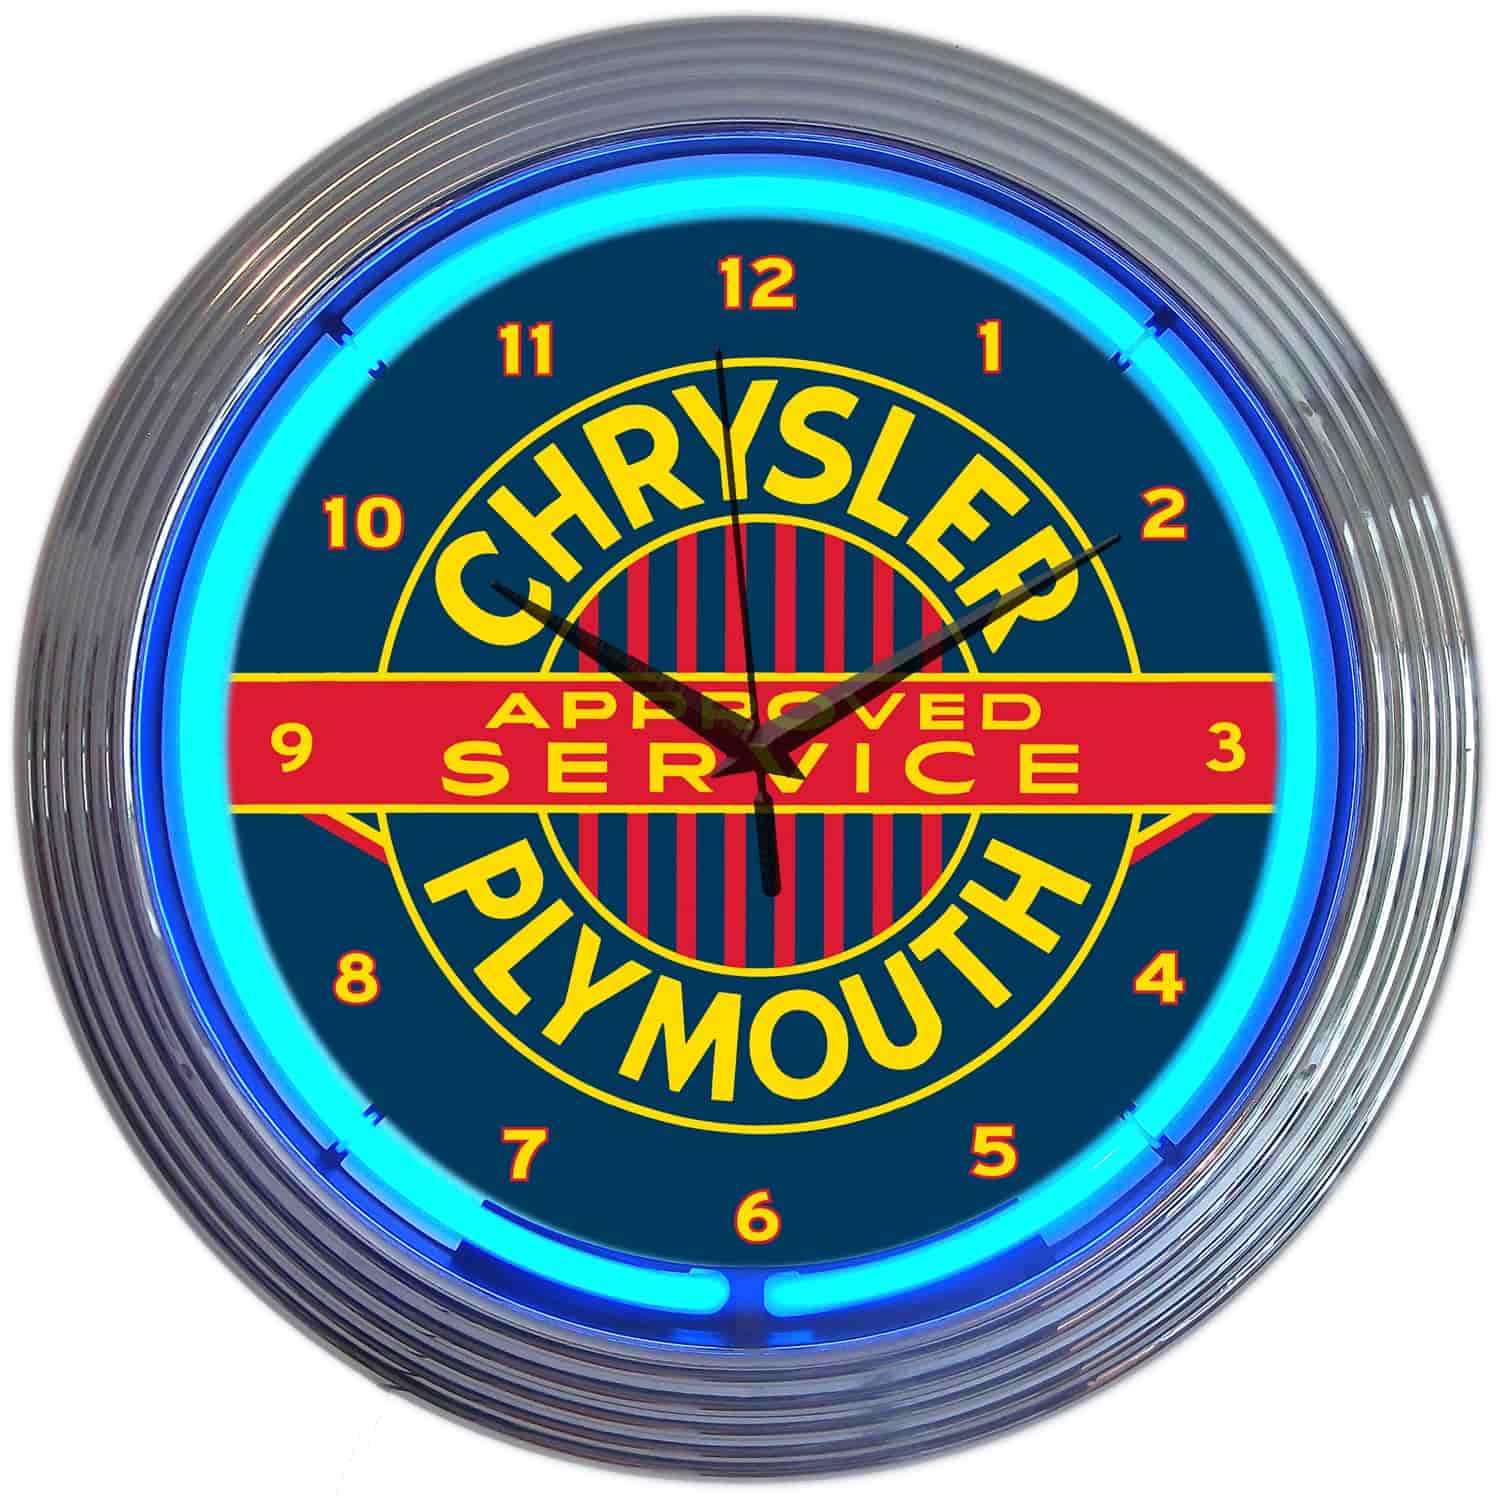 Chrysler Plymouth Approved Service Neon Clock